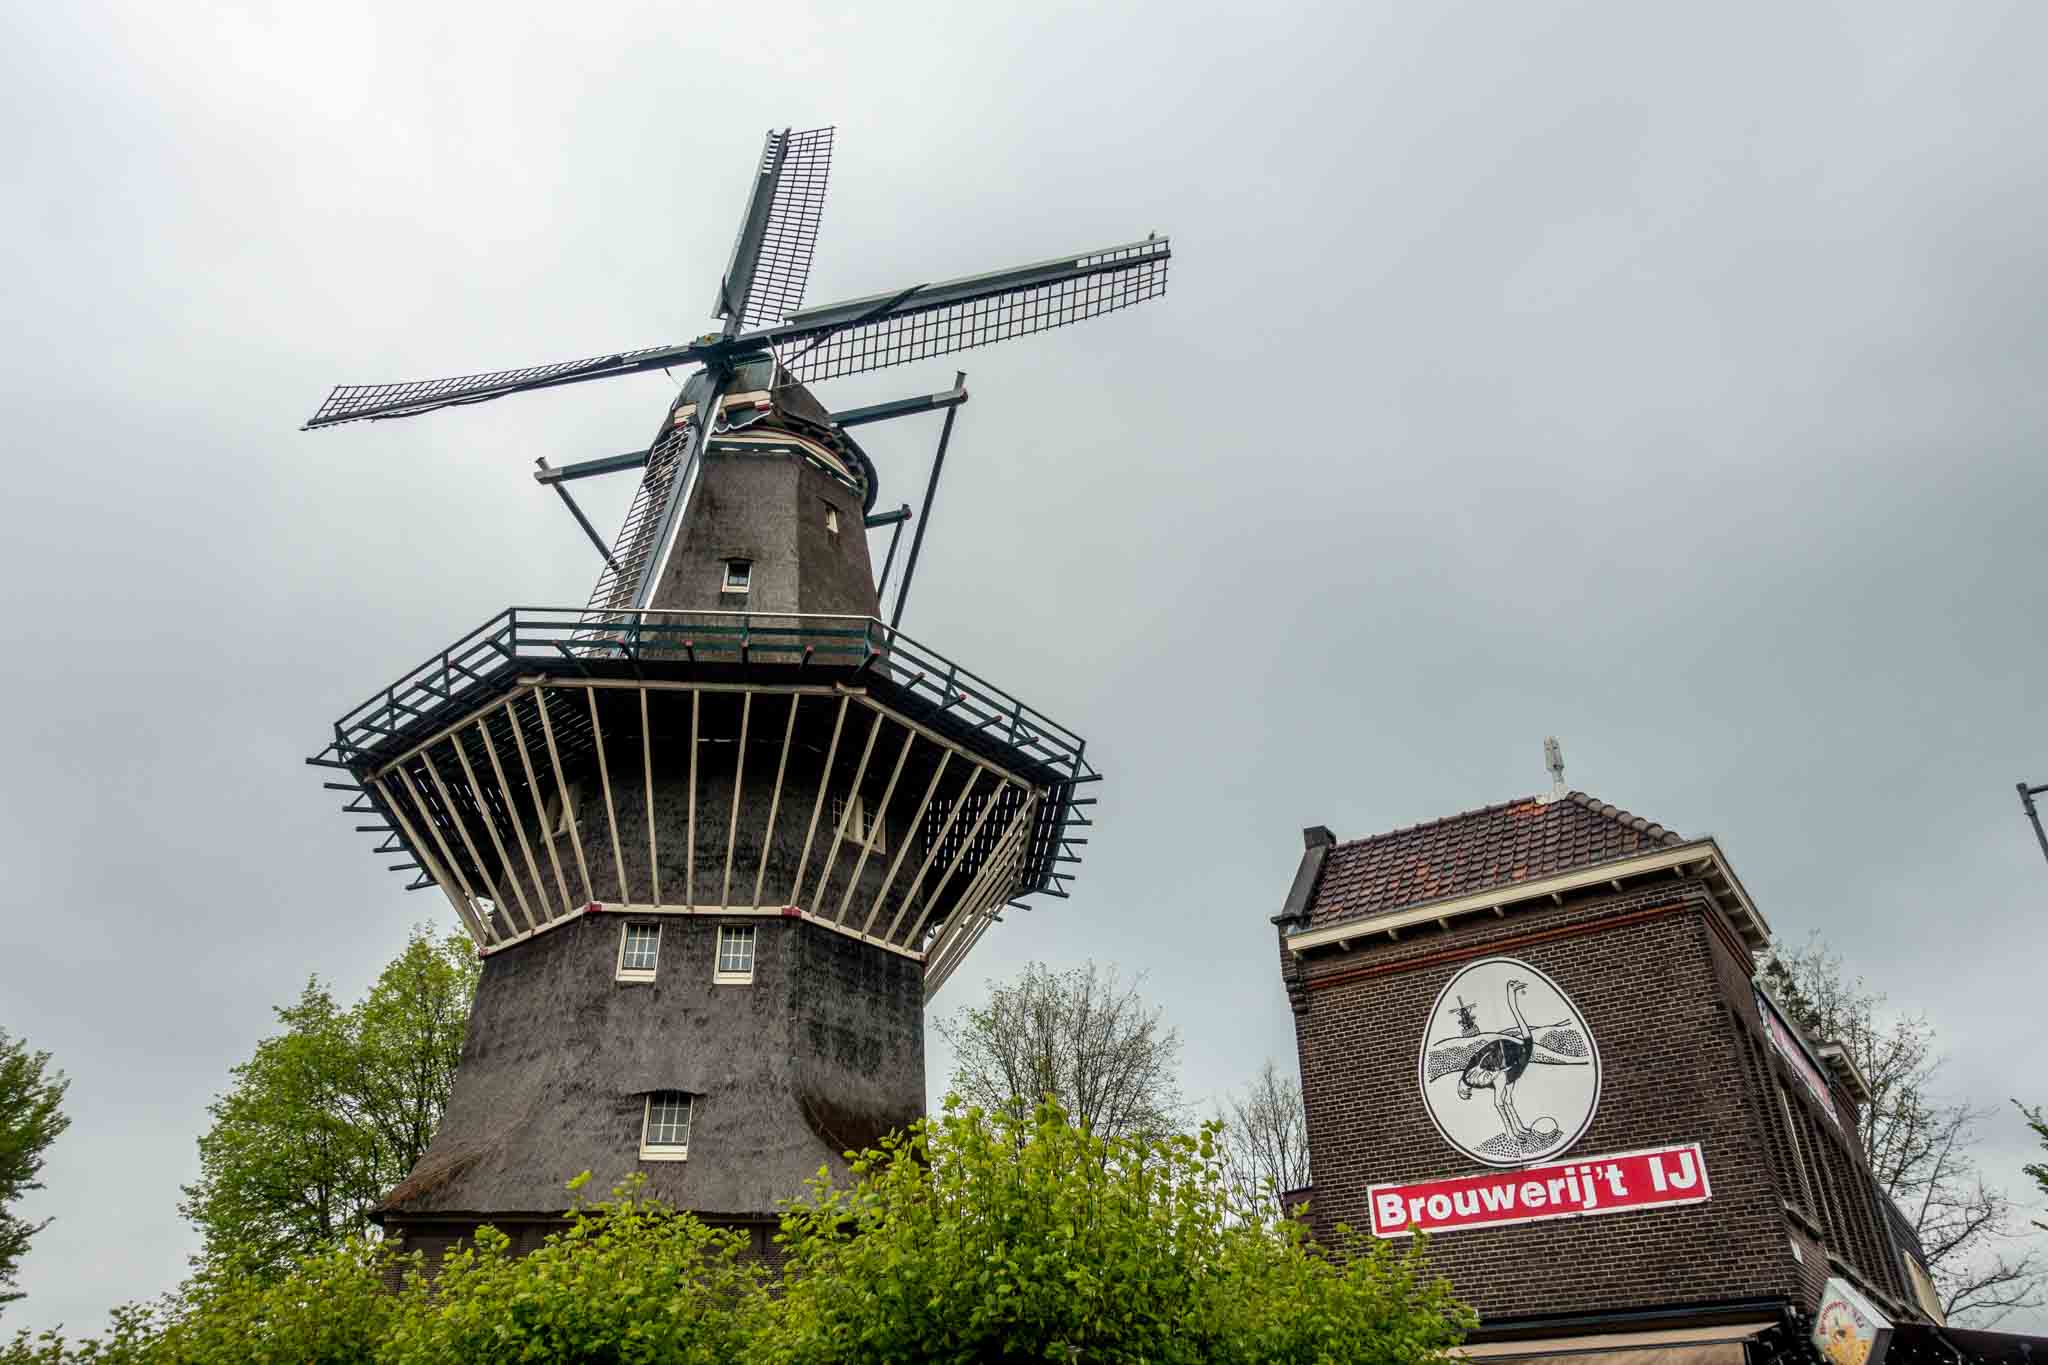 Windmill next to sign for Brouwerij 't IJ